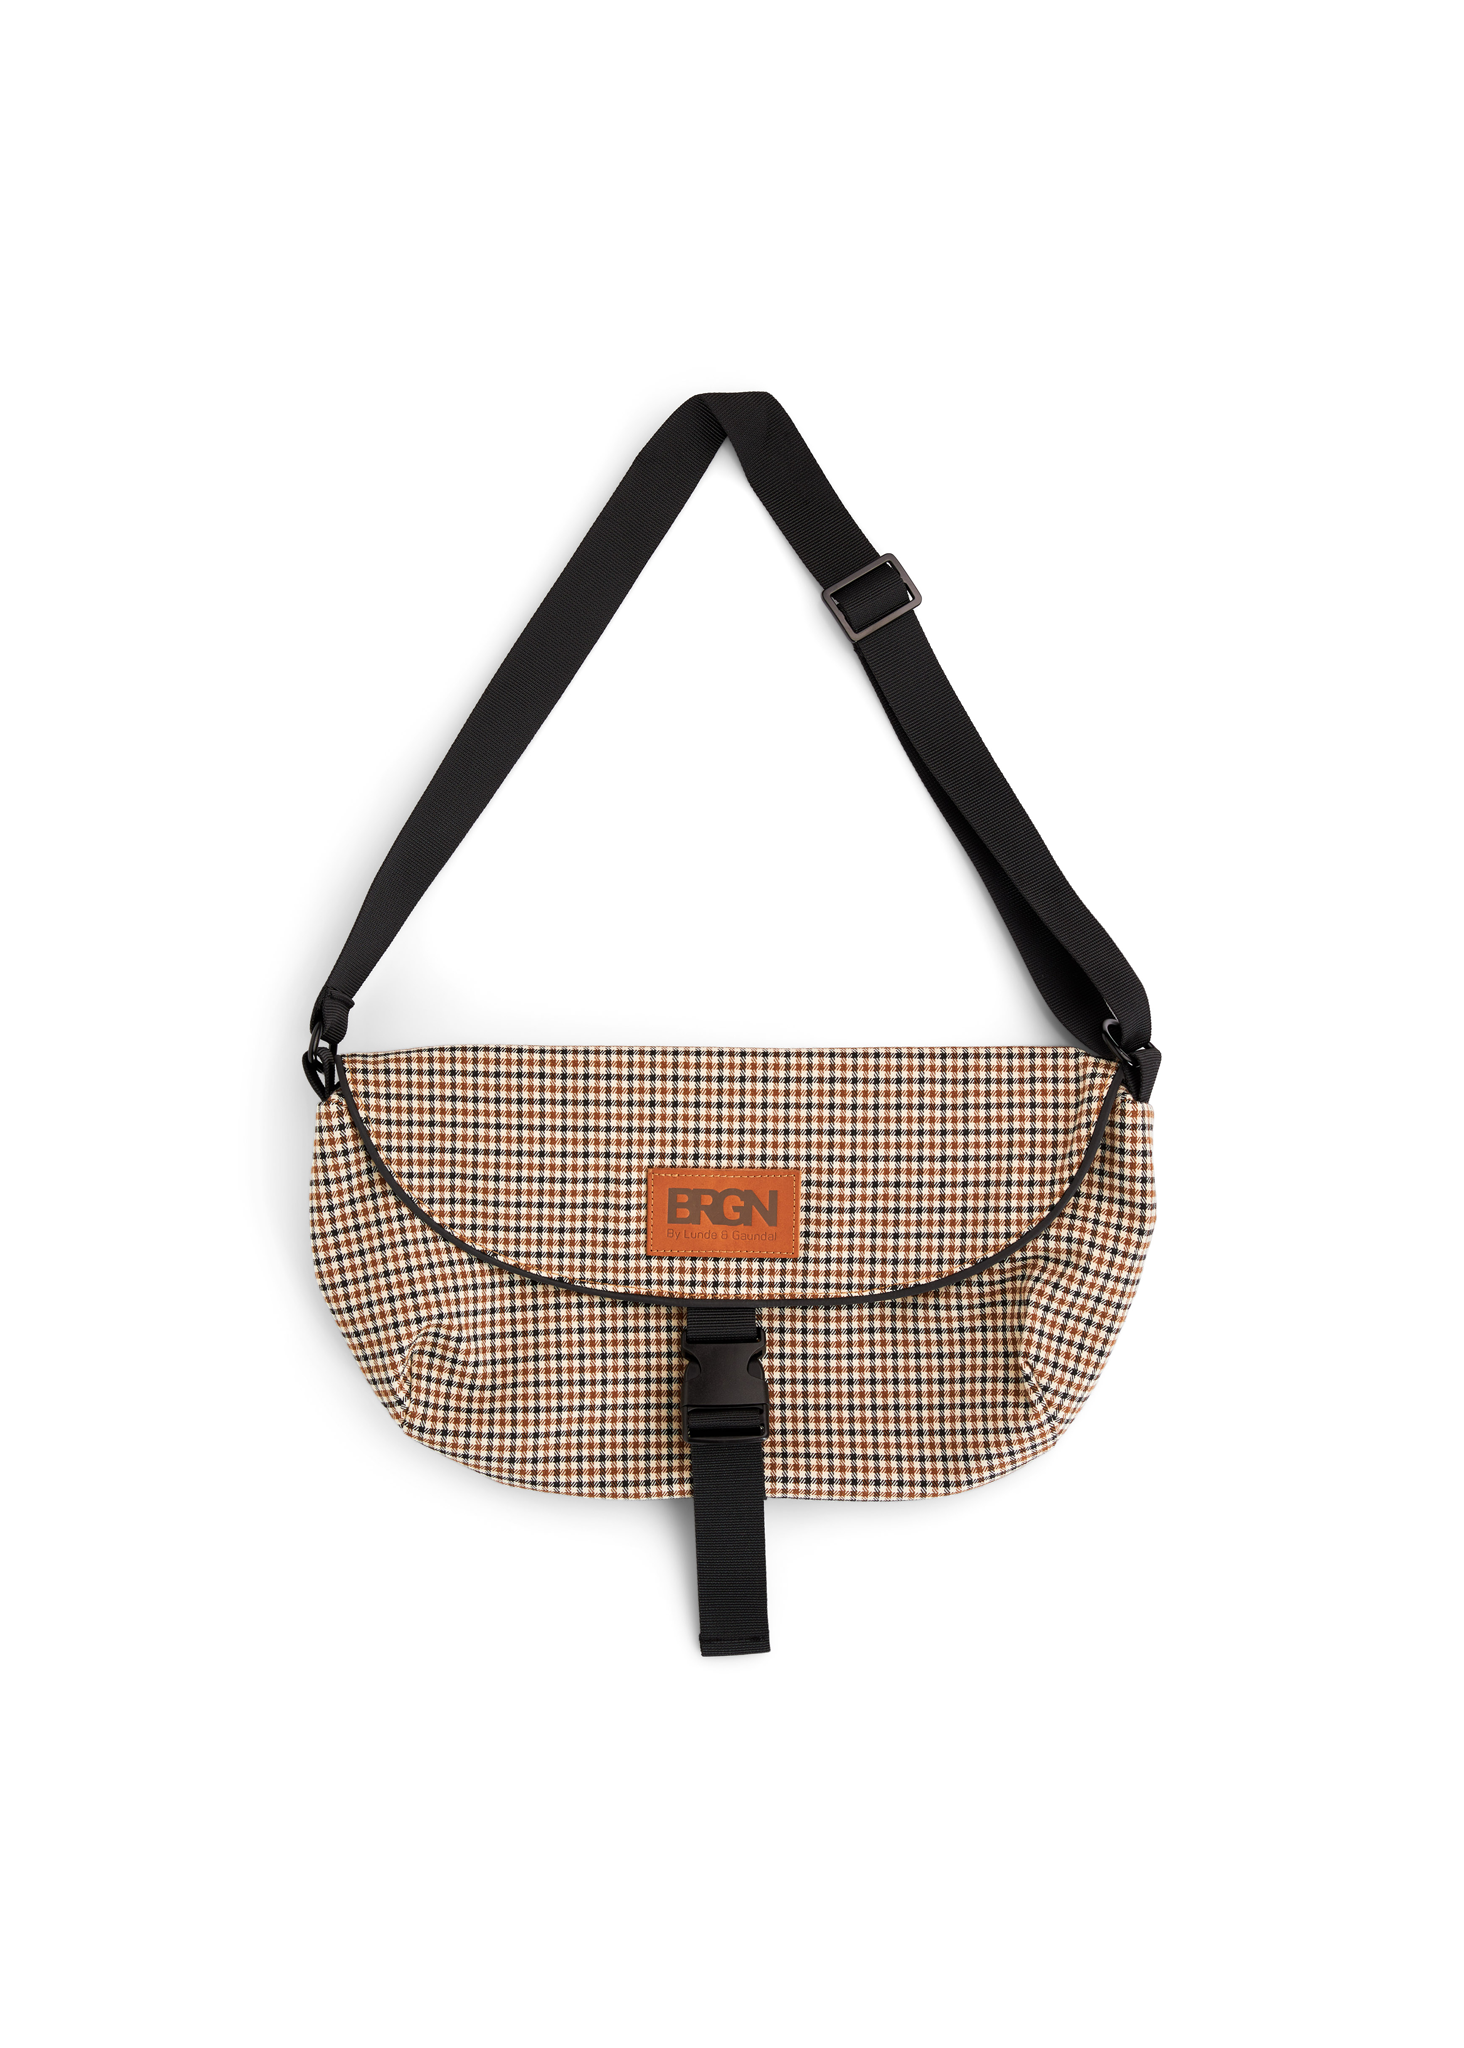 BRGN by Lunde & Gaundal Banana Bag Accessories 143 Check